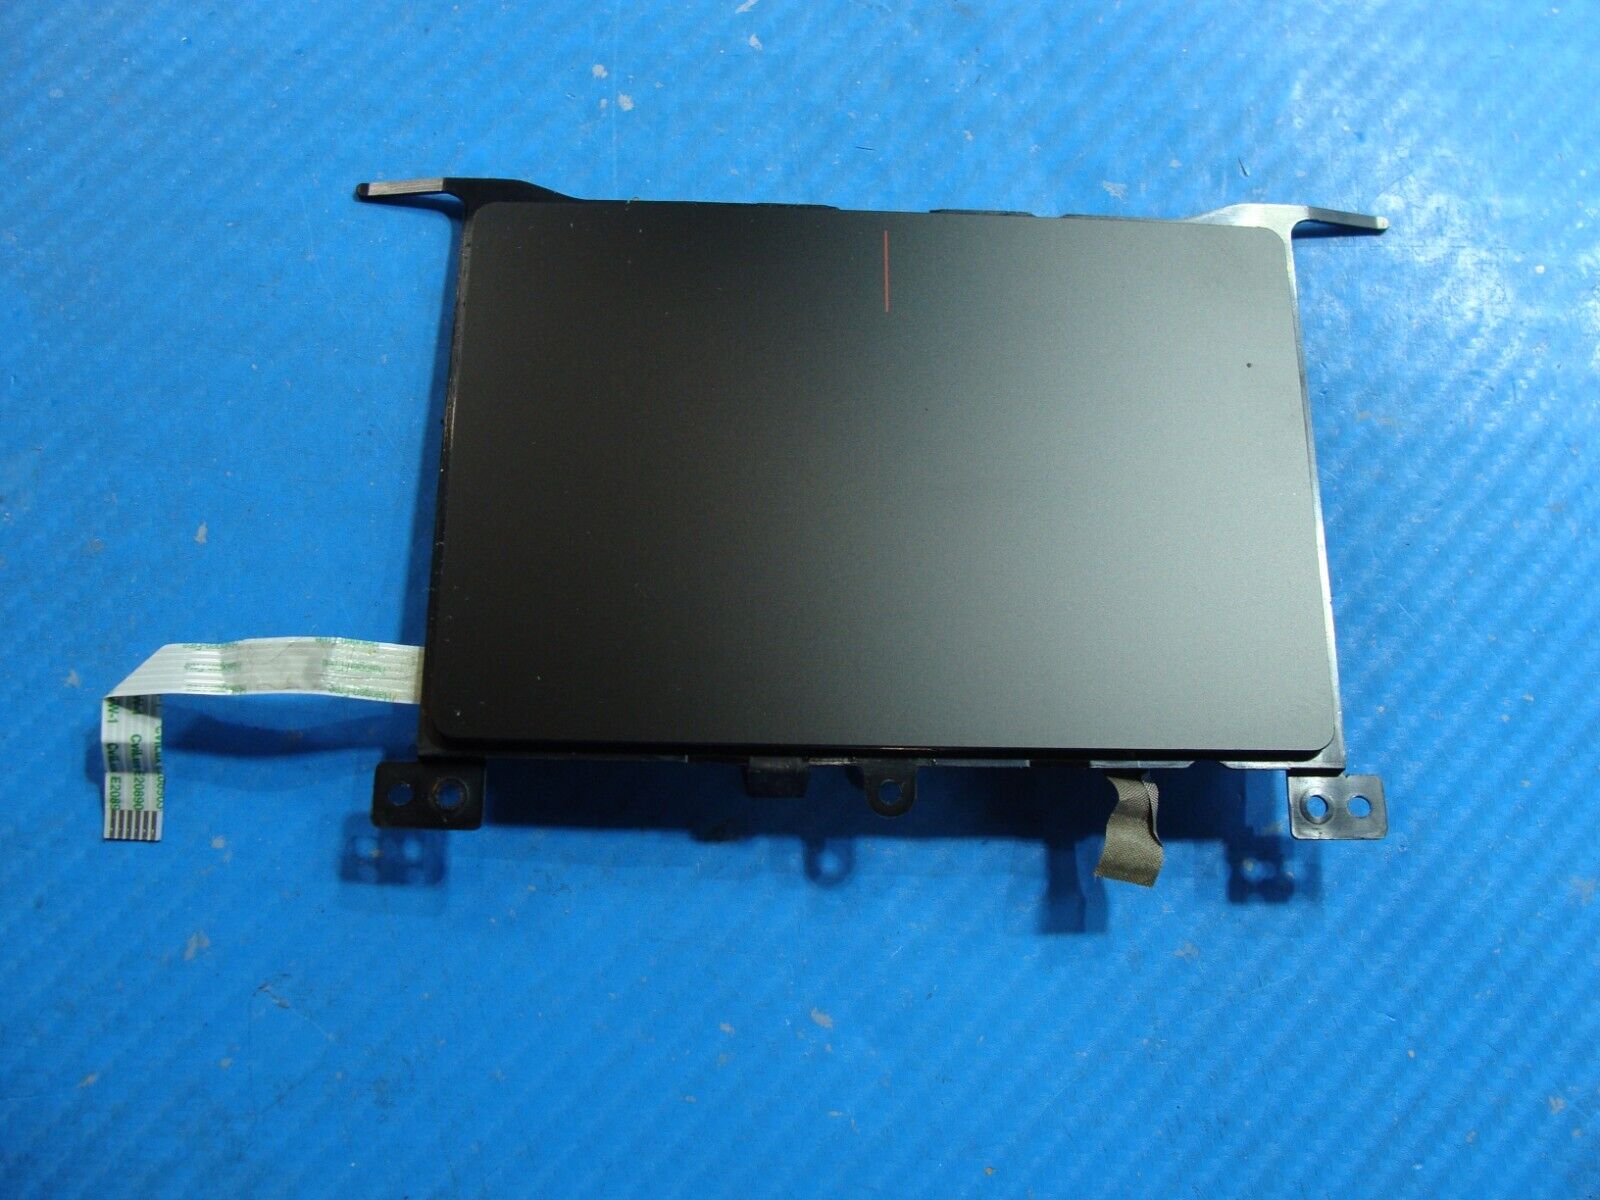 Lenovo IdeaPad 15.6” Y50-70 Genuine Laptop TouchPad w/Cable Black 920-002382-01